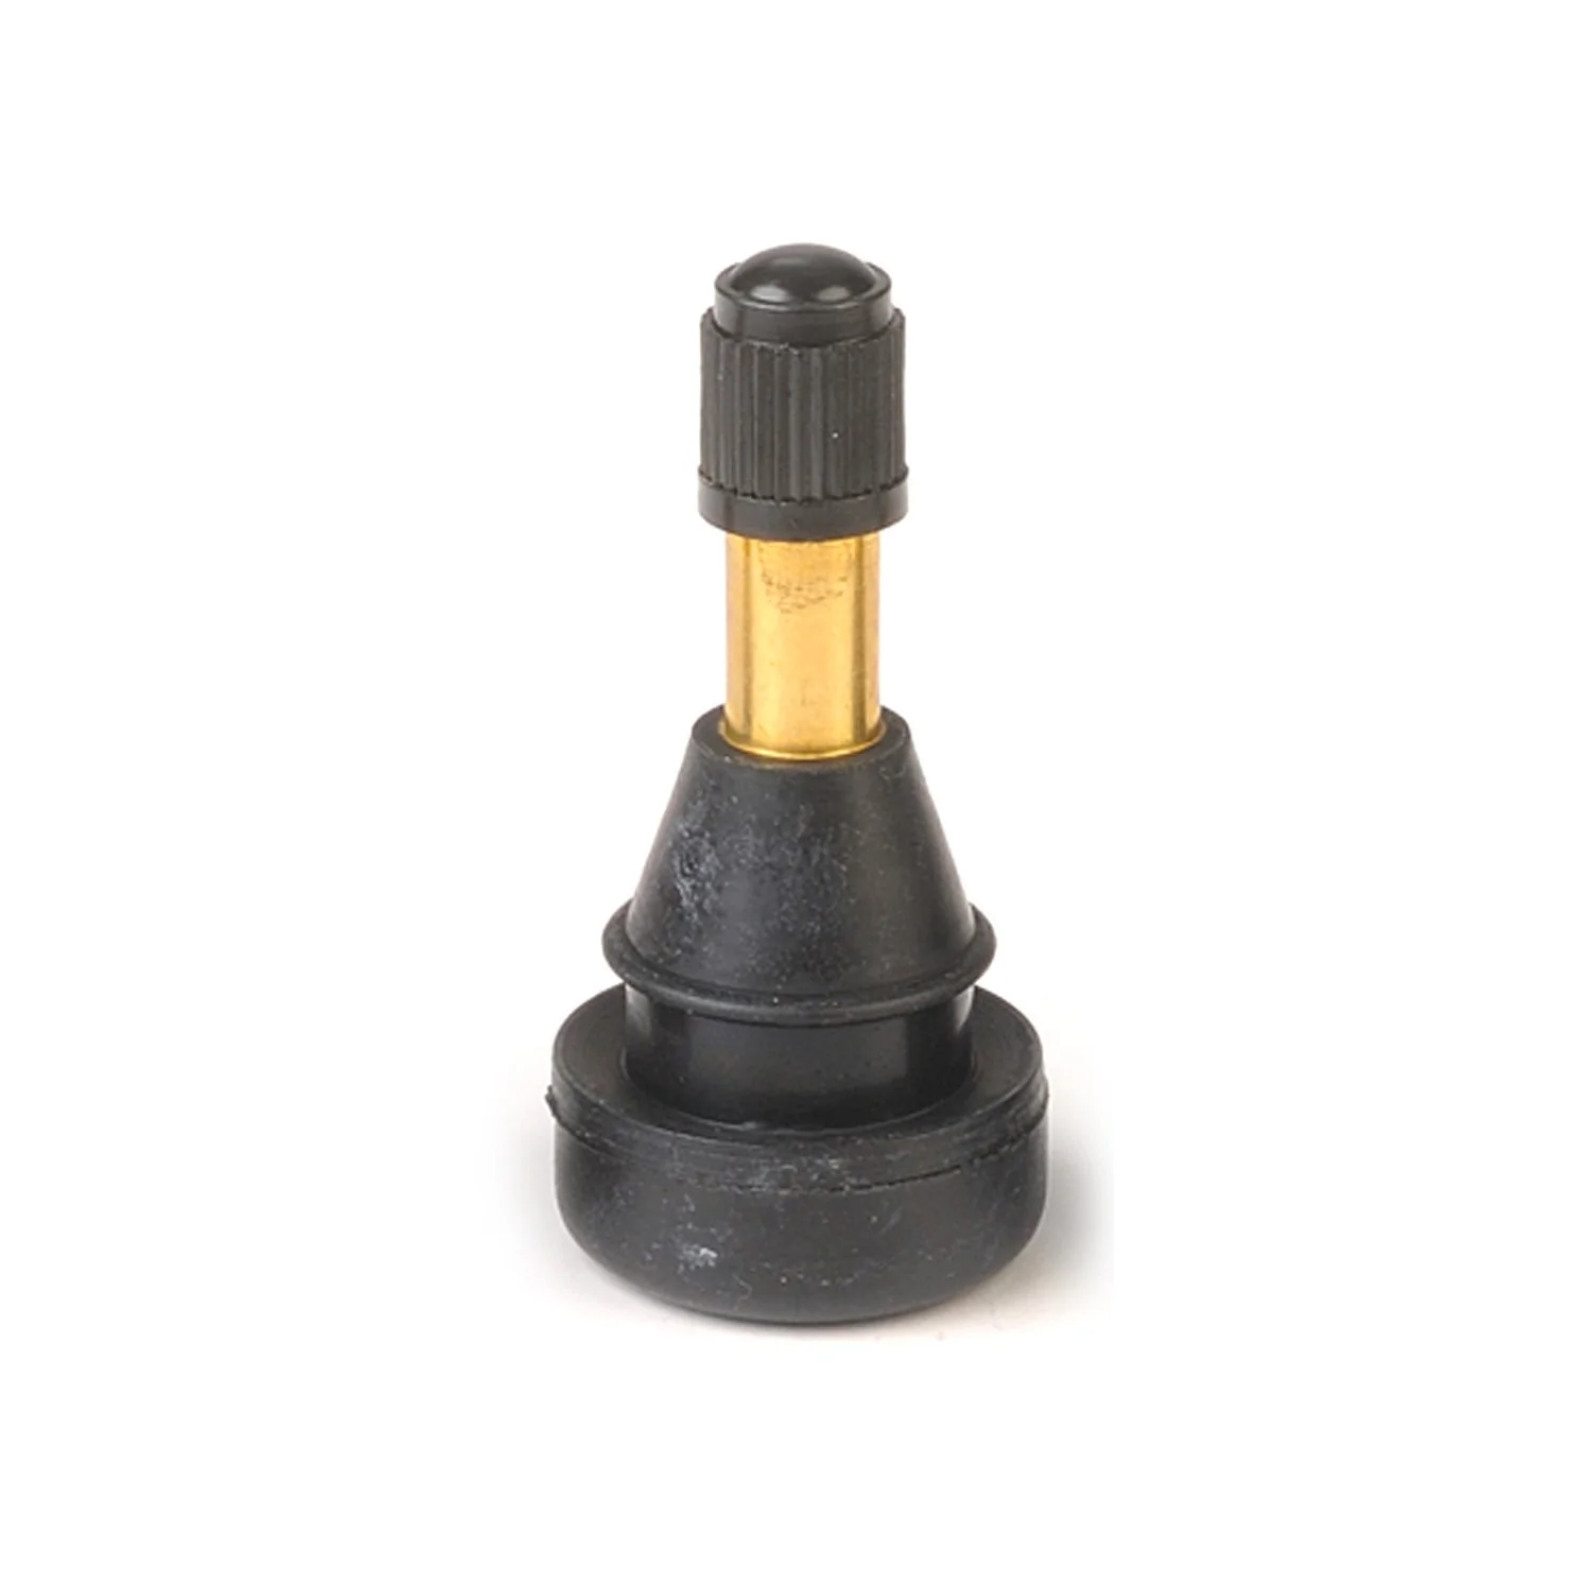 801 High Pressure Rubber Snap-in Tubless Tire Valve Stems, For 0.625" Valve Stem Hole | TR801HP